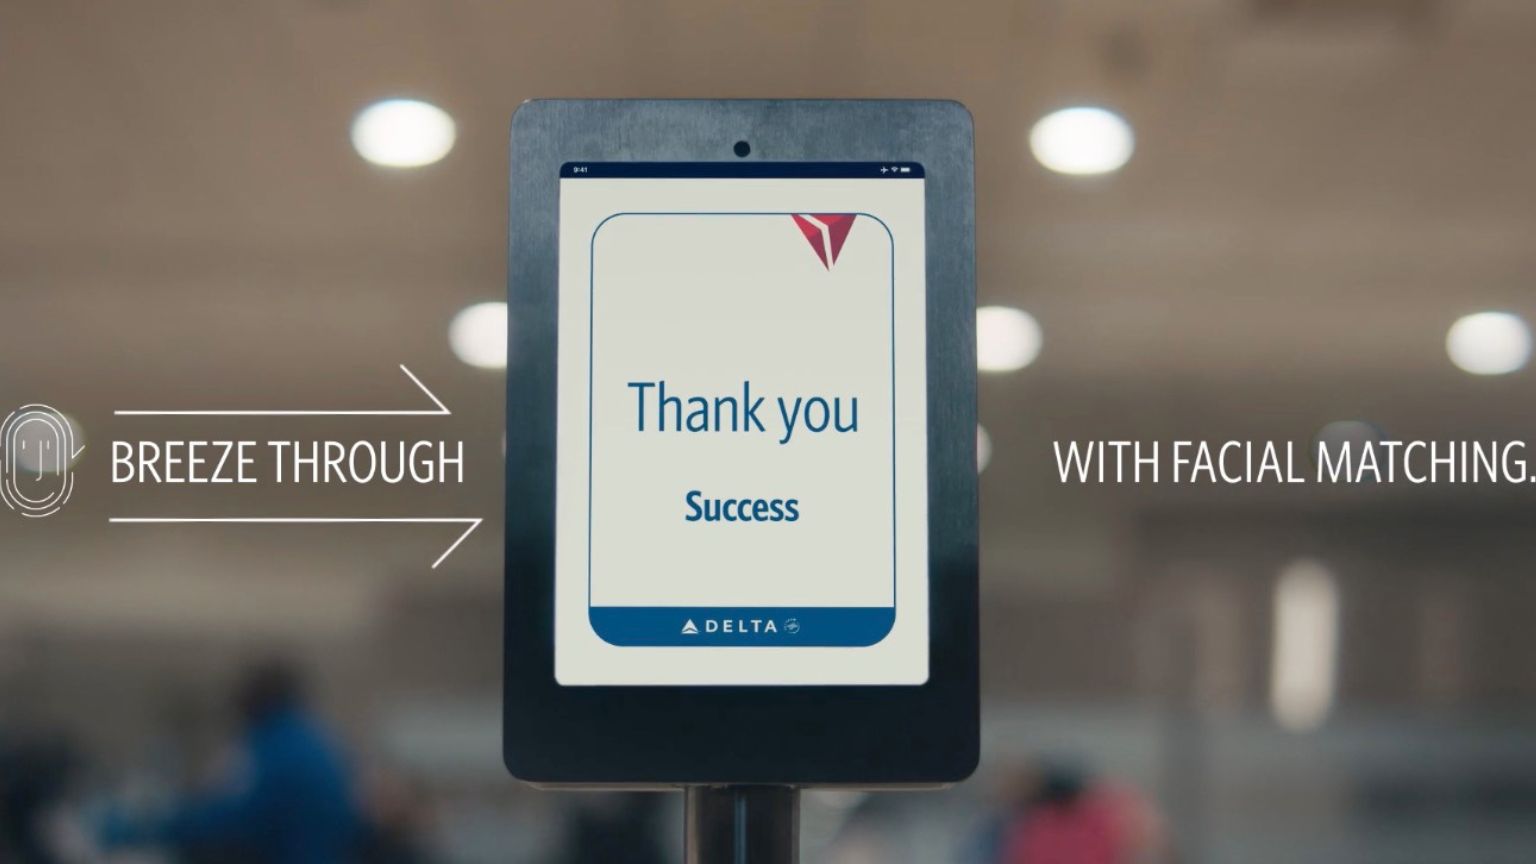 Delta introduces facial recognition to match with digital ID for more “convenient” travel